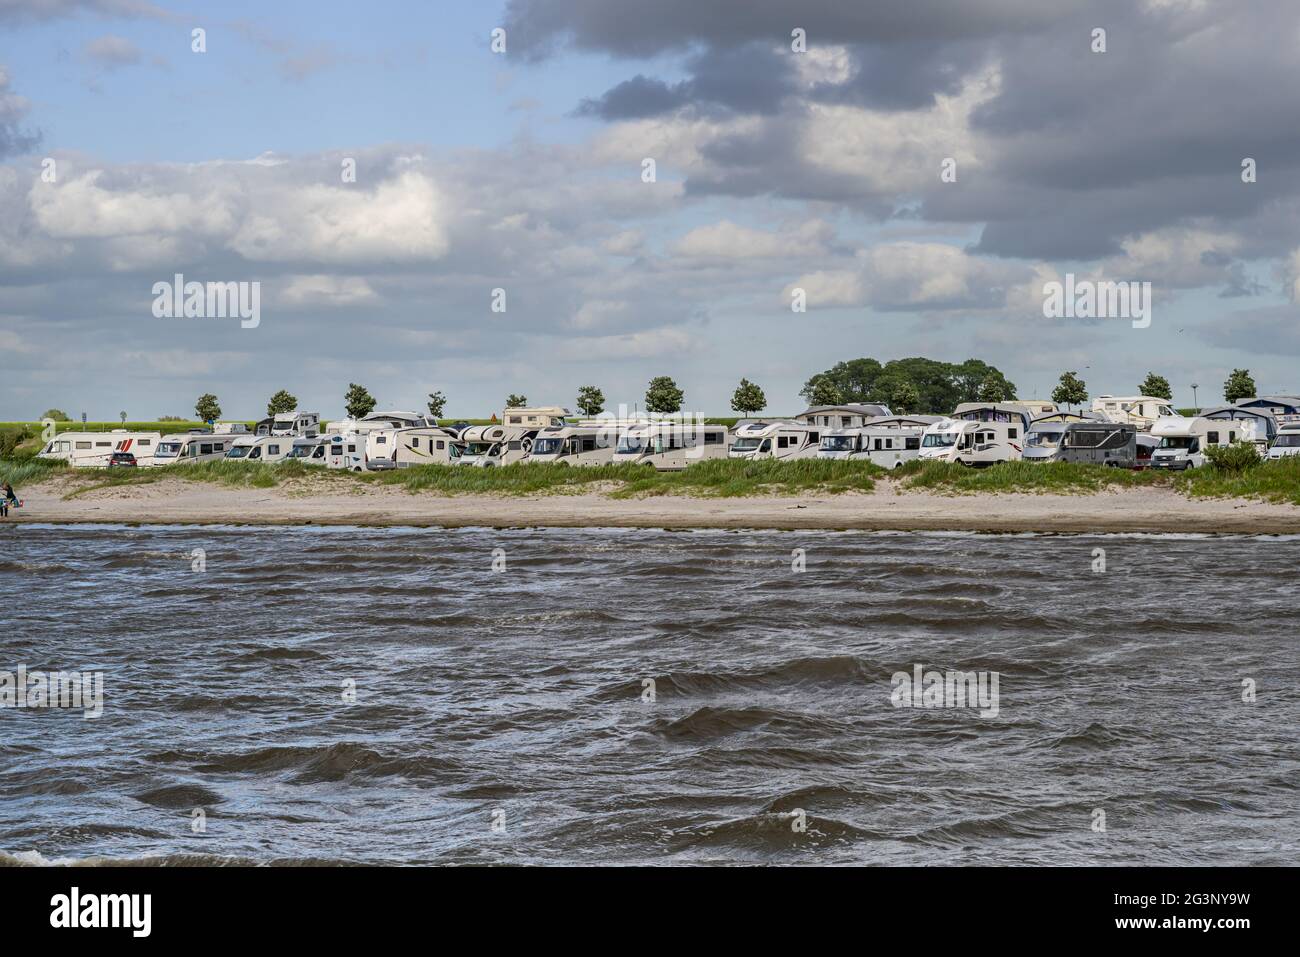 June 13, 2021 - Malmo, Sweden: RVs parked by a beach a windy summer day. The sales of RVs have increased since the pandemic has made international travel more difficult Stock Photo